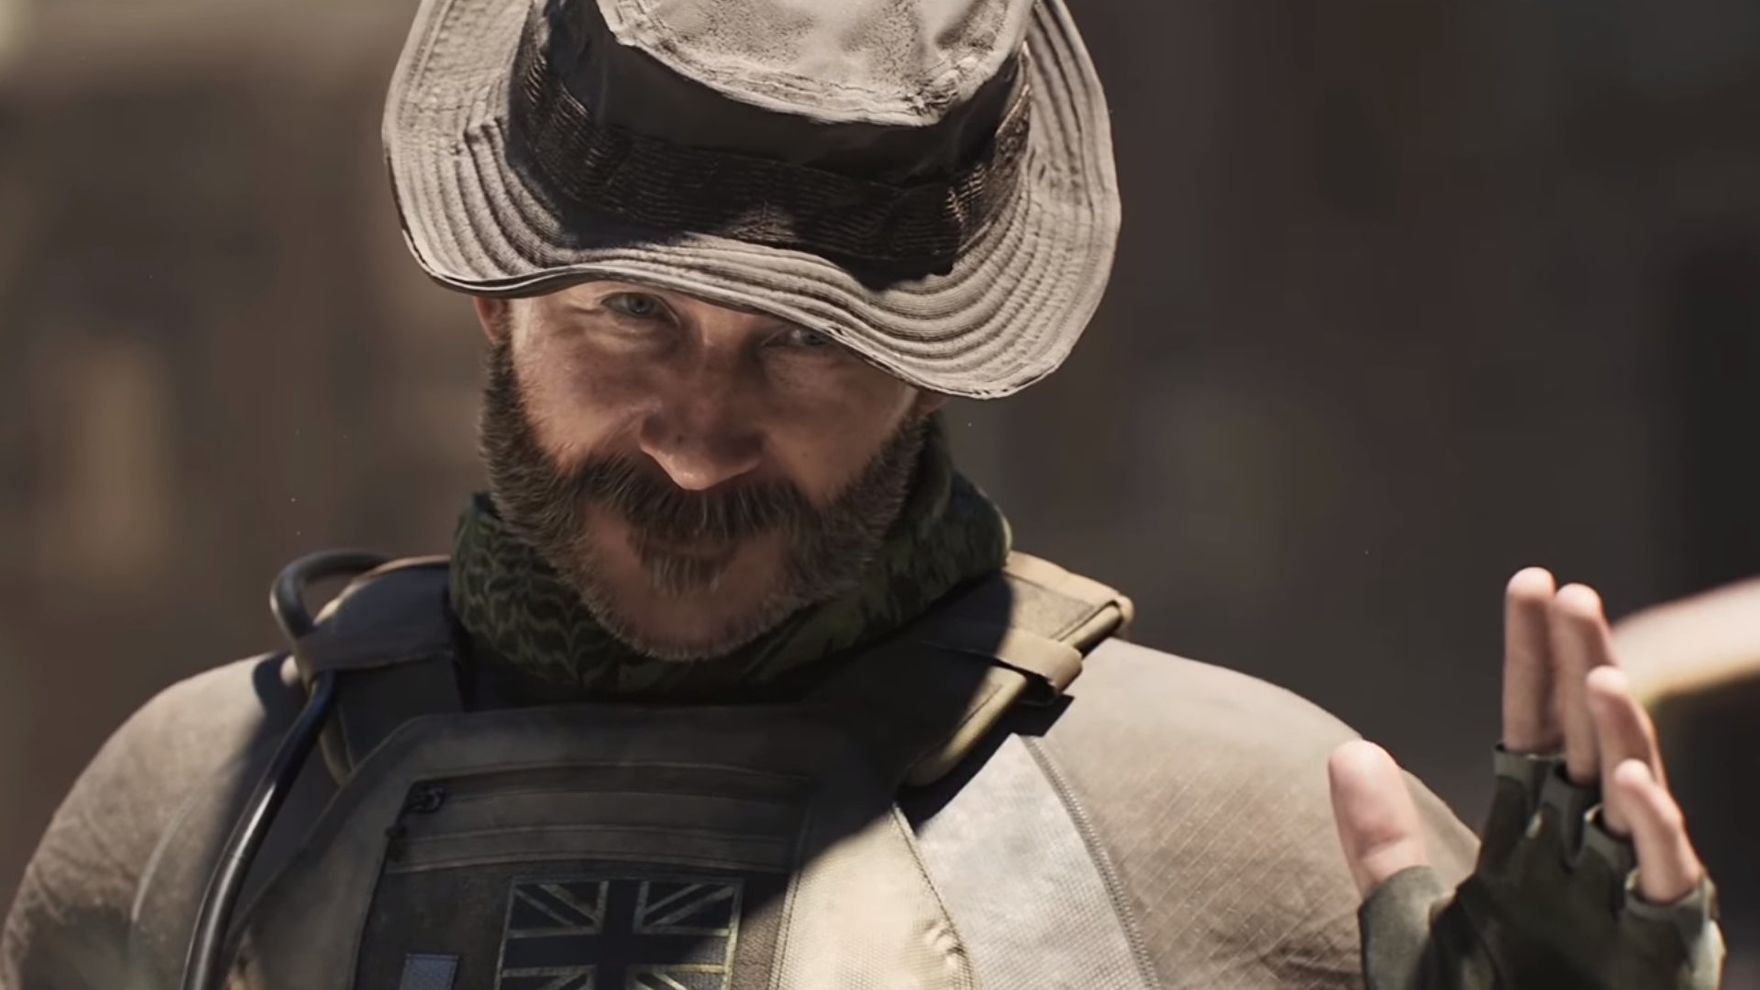 A bearded man in a hat raises his hand in greeting in Call Of Duty Modern Warfare